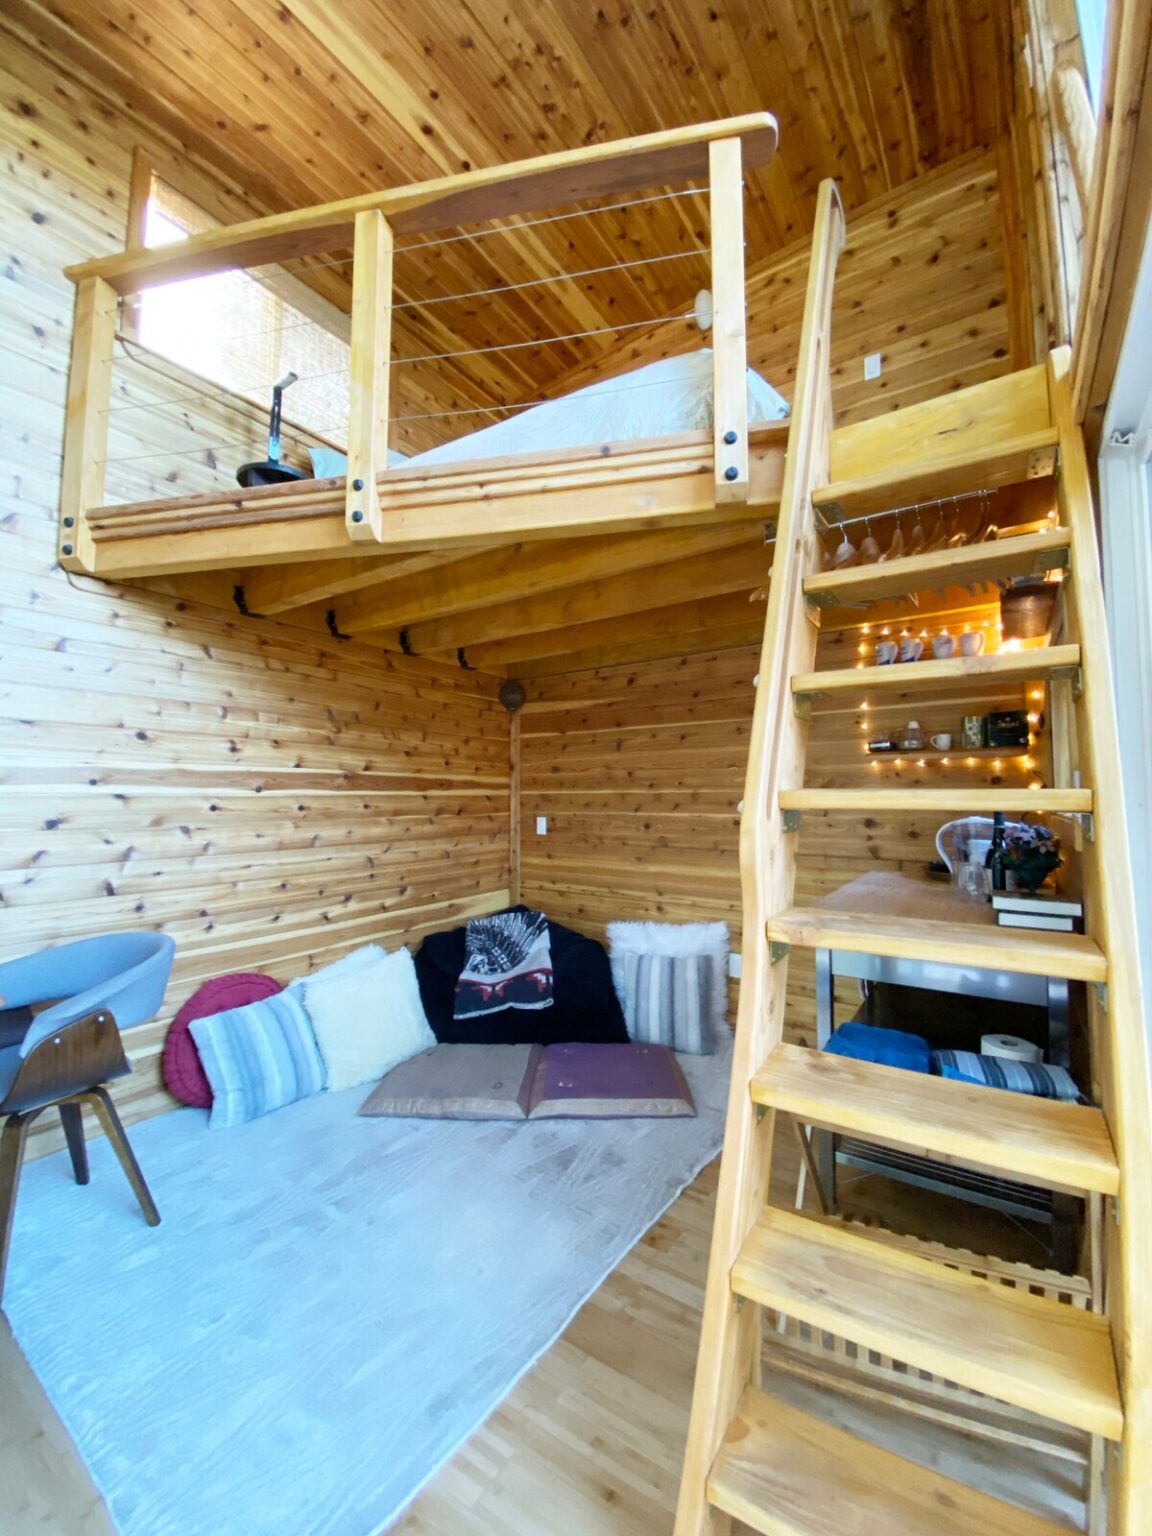 Two Storey Gorgeous Tiny House - Living in A Tiny